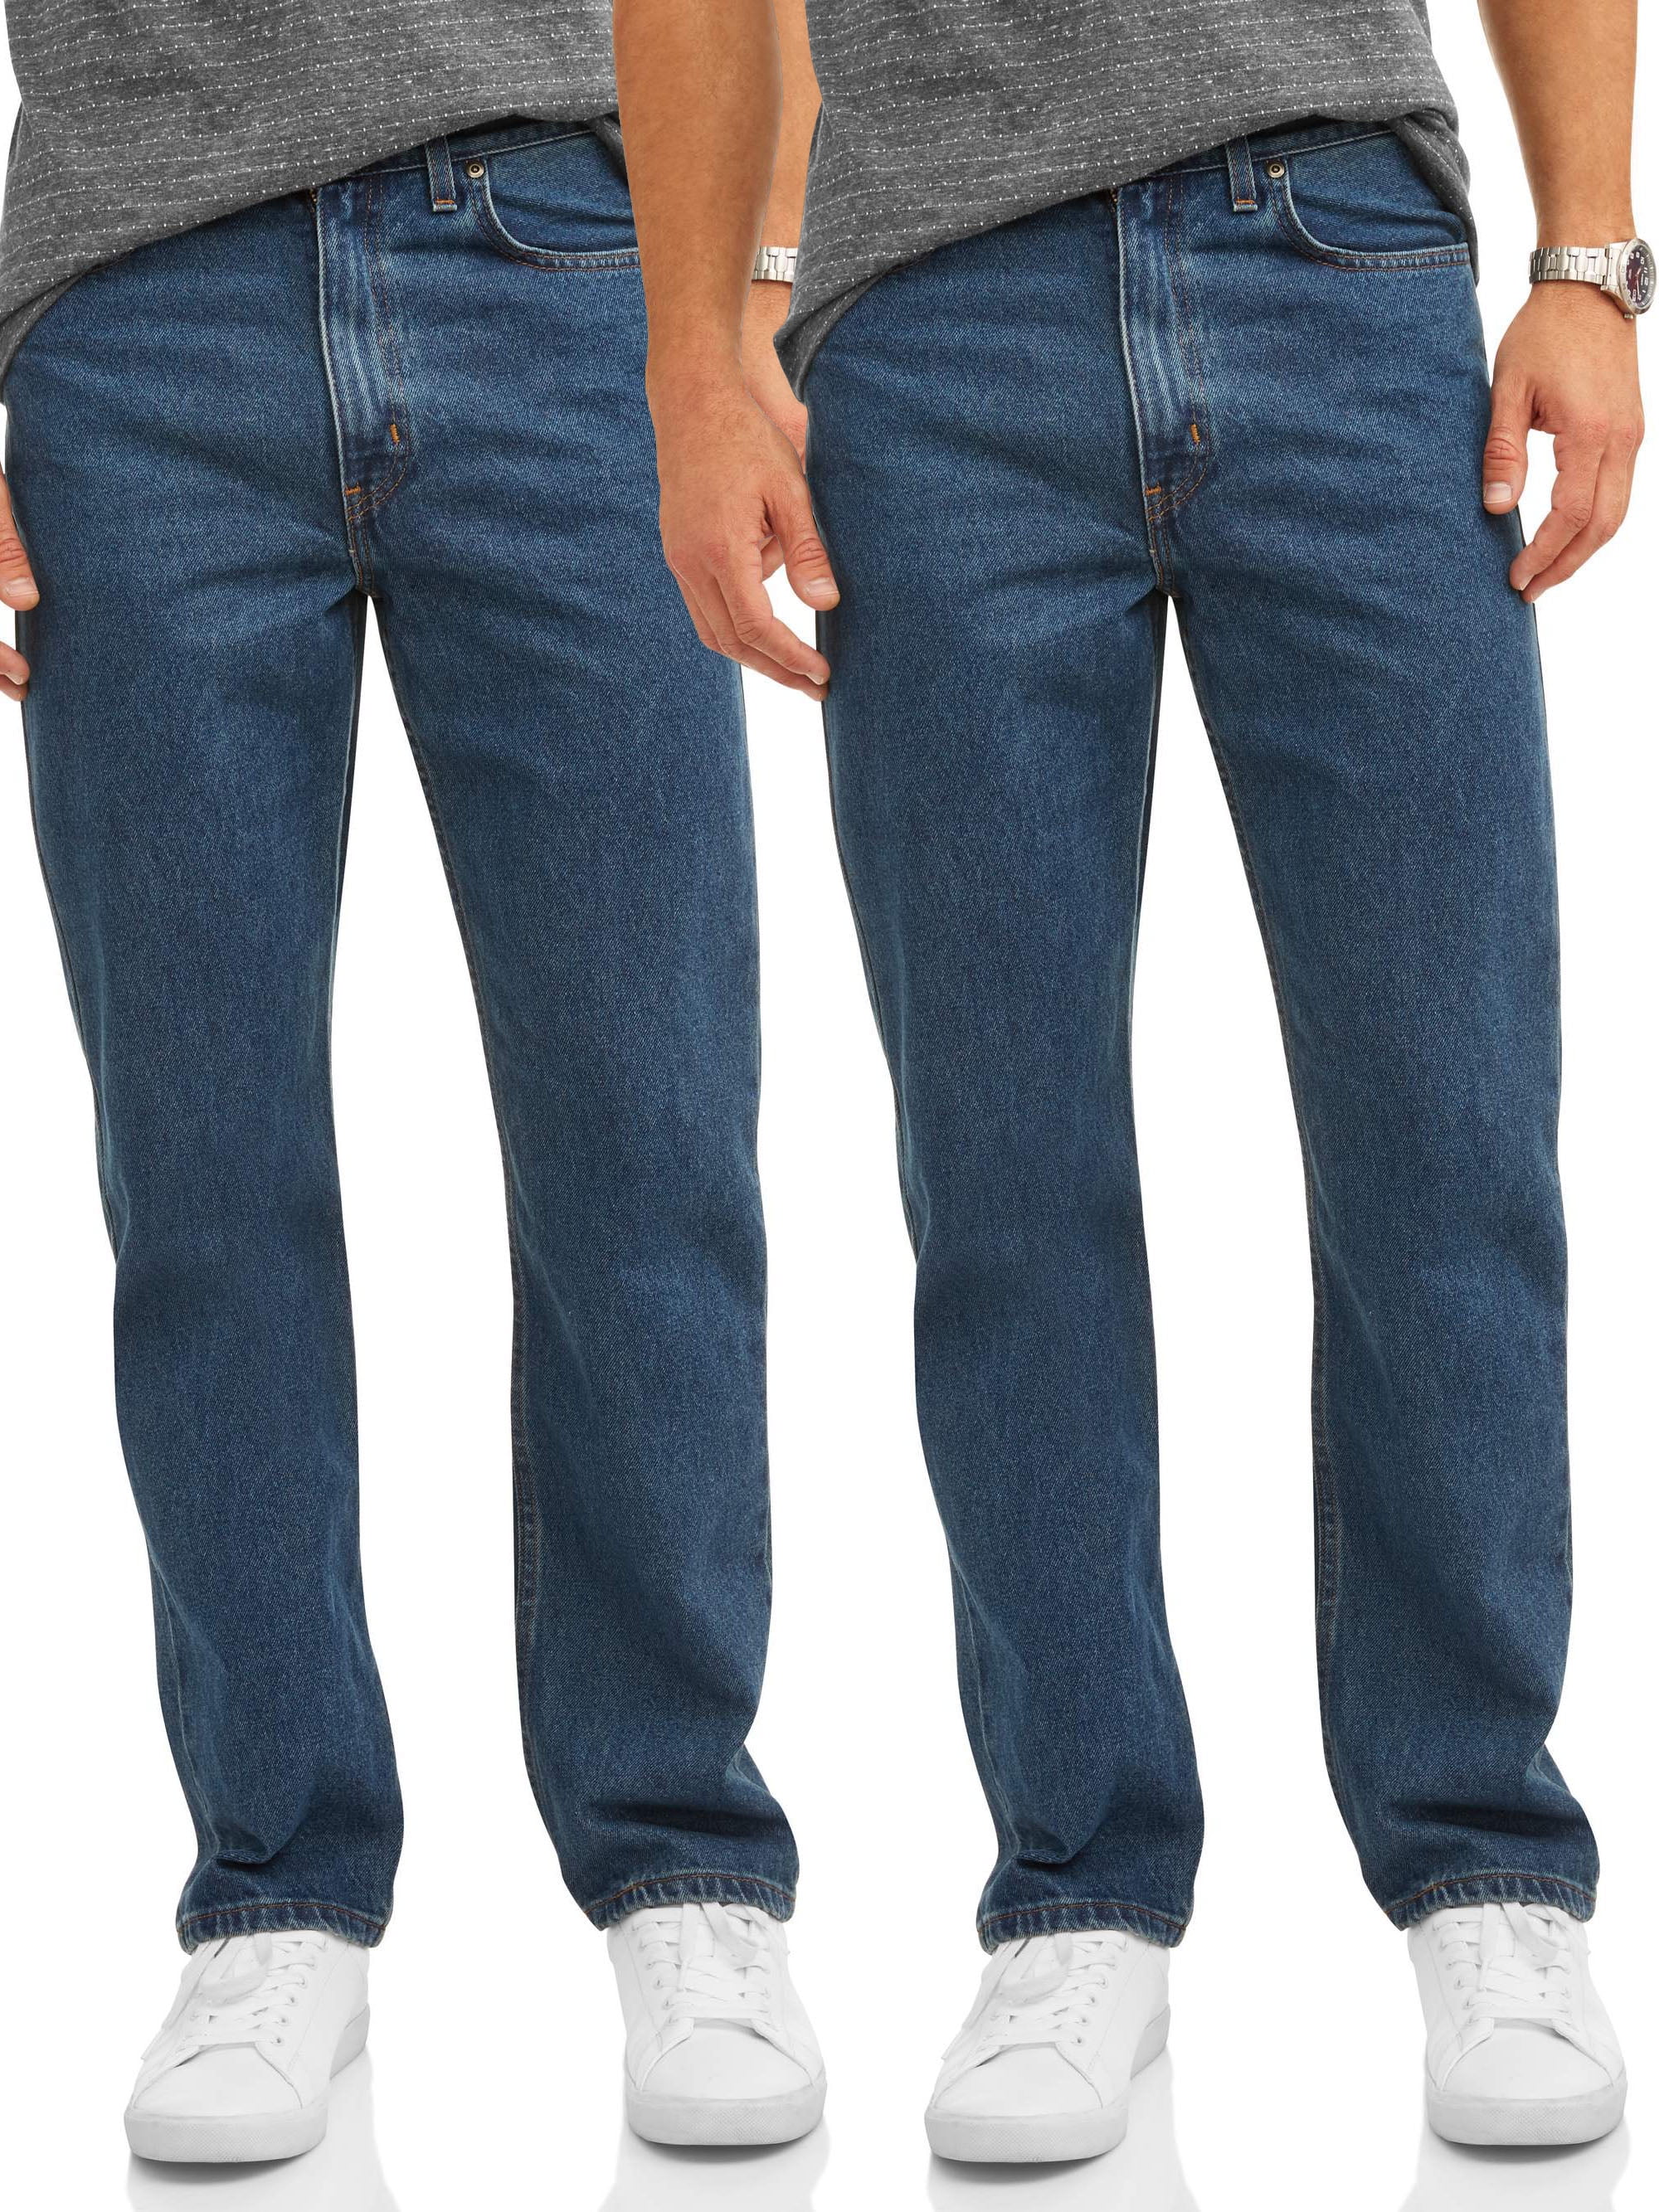 walmart men's relaxed fit jeans